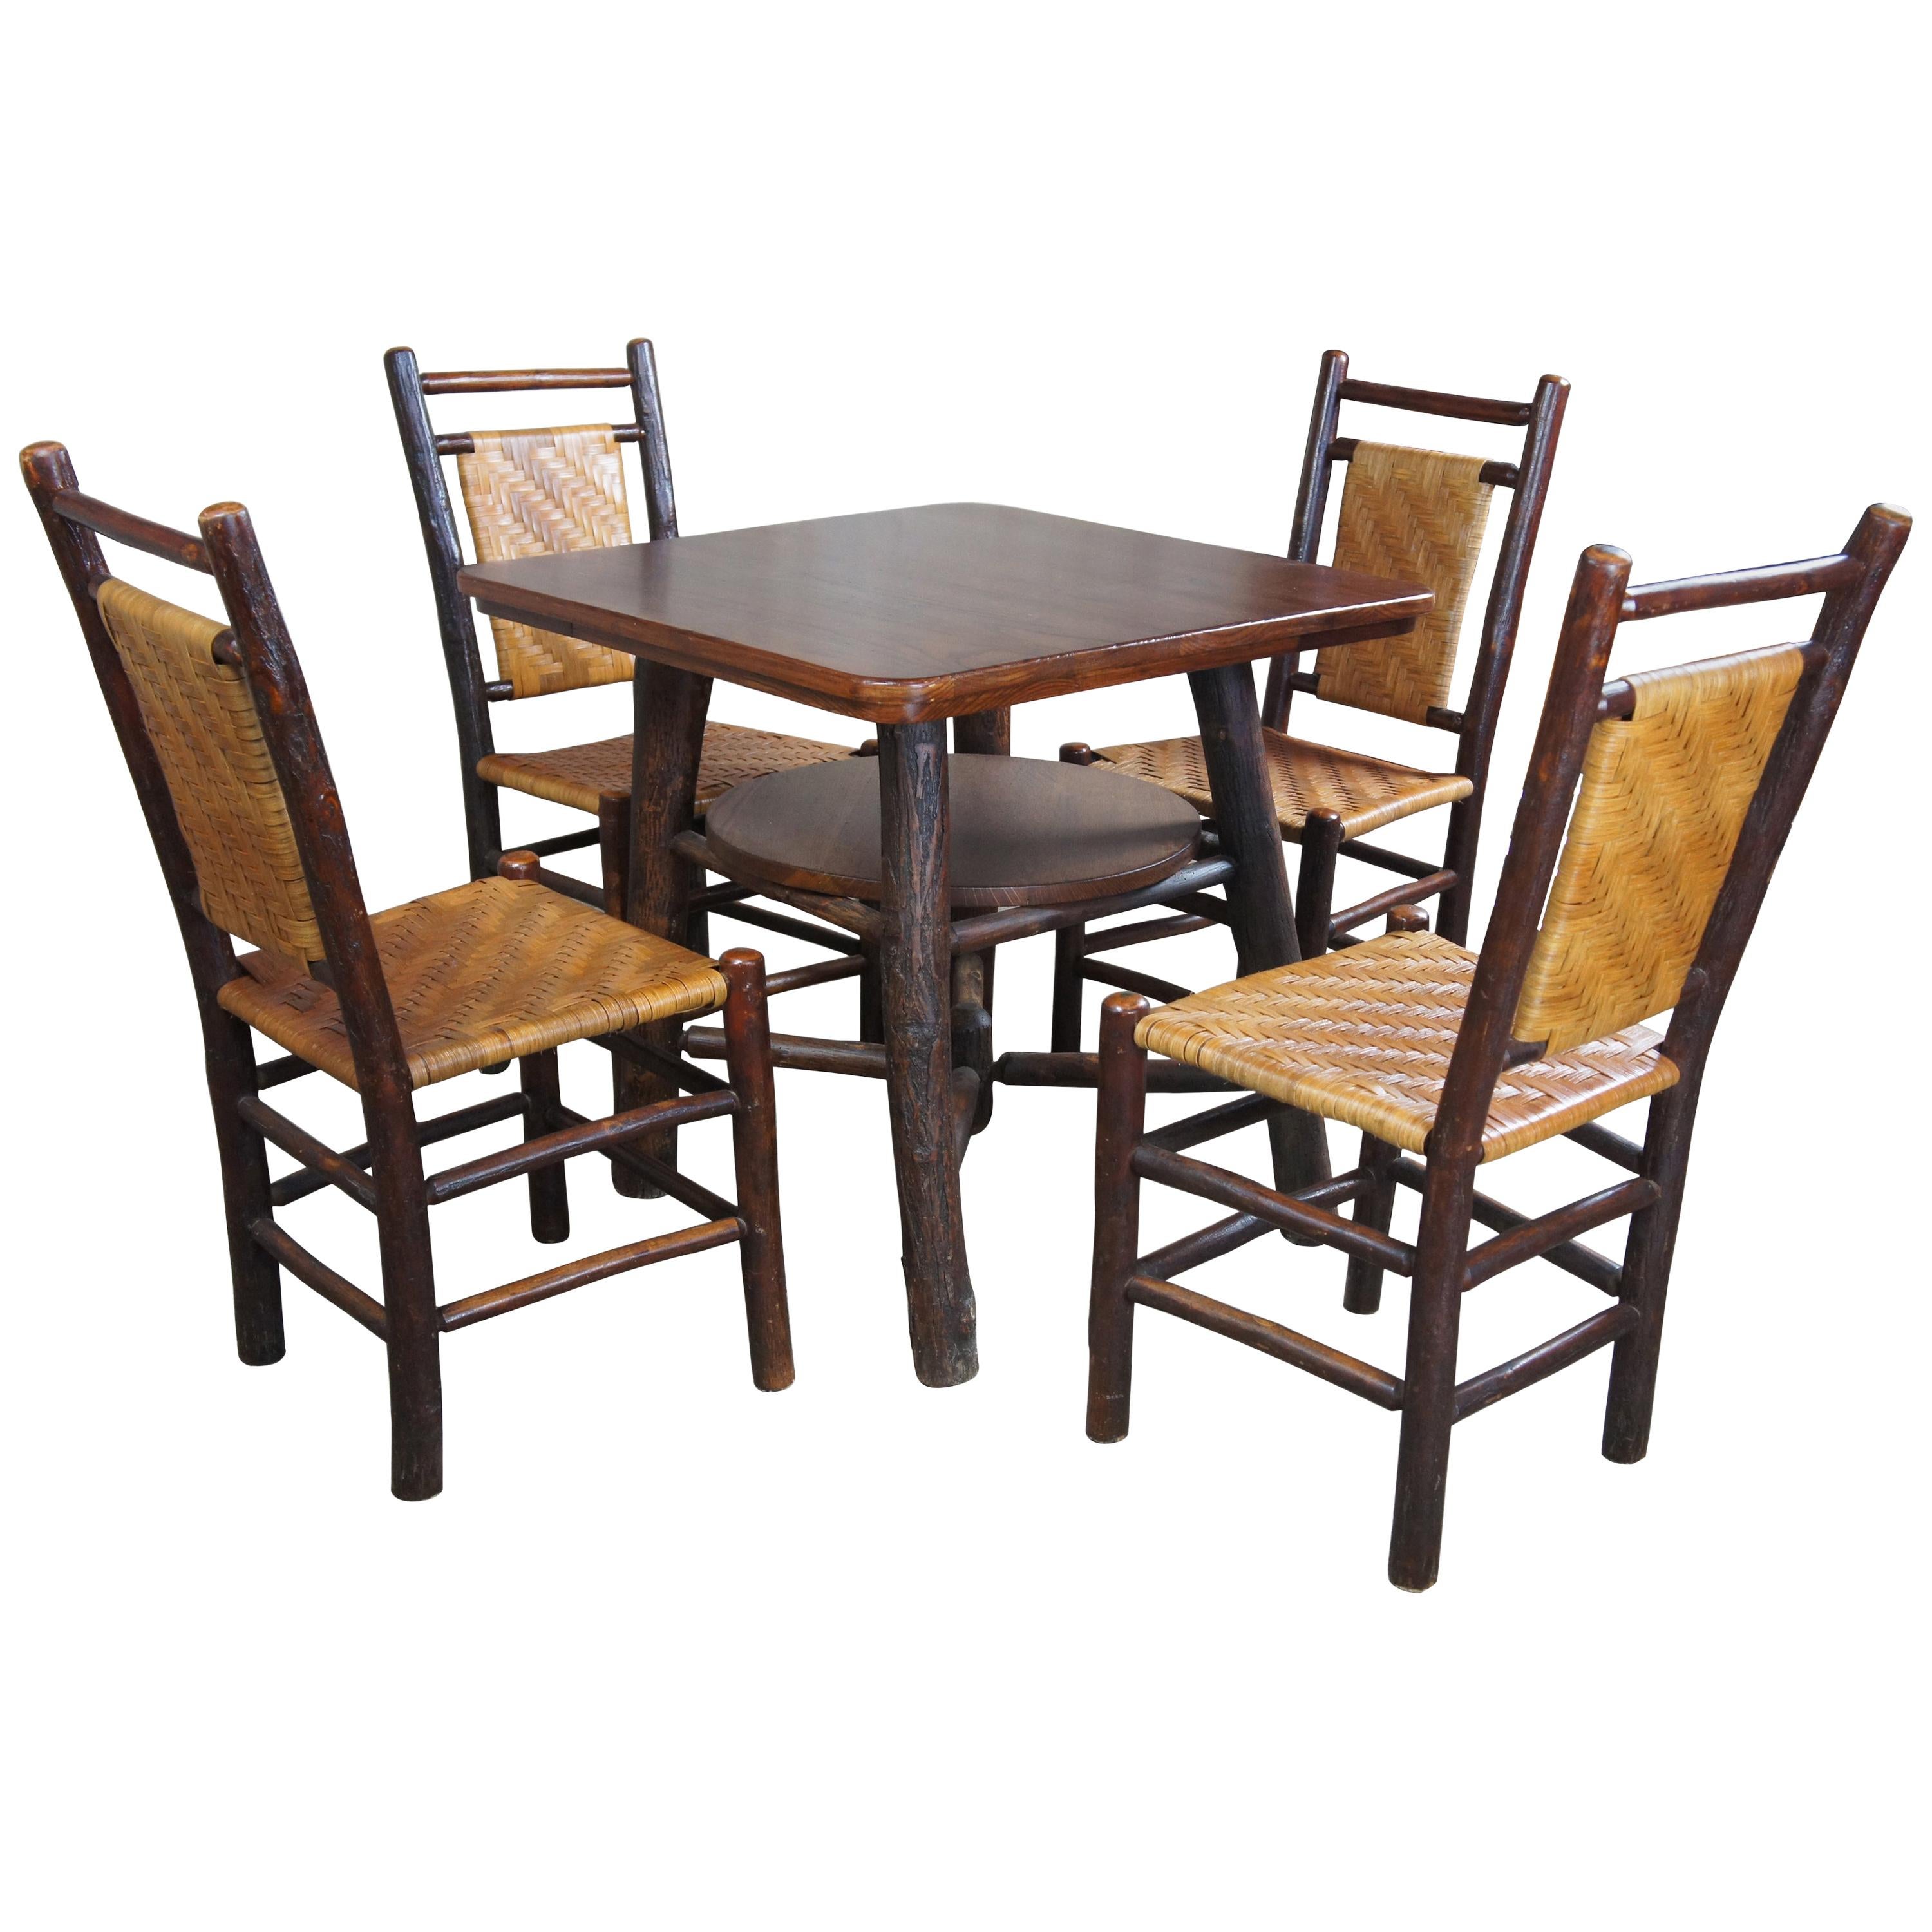 Rustic Hickory Furniture Company Game Table & Chairs No 103 19 Adirondack Lodge